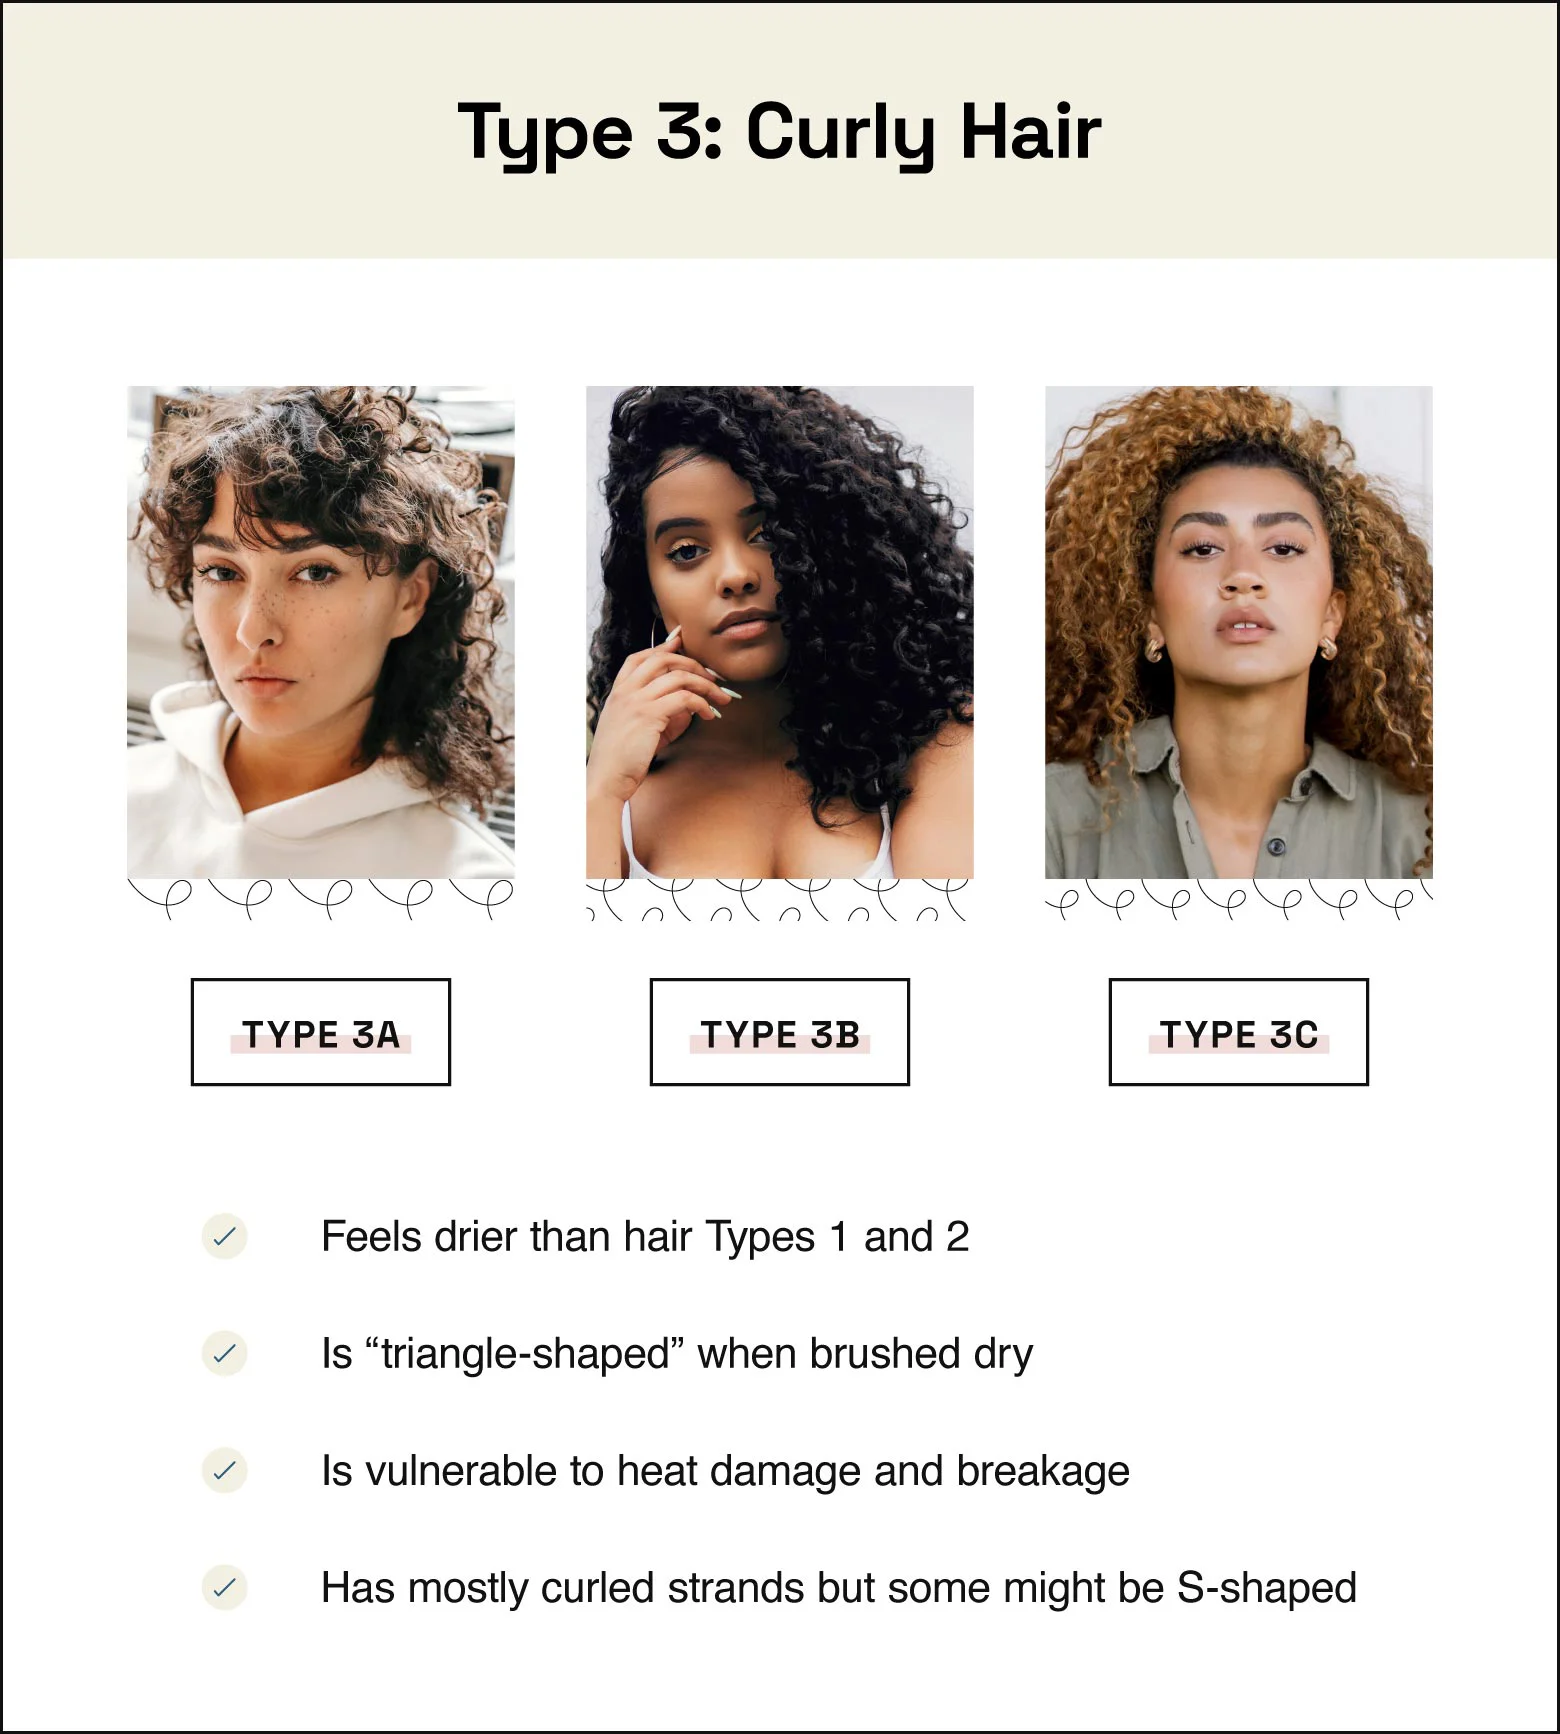 Type 3 hair is curly, feels drier than hair Types 1 and 2, is “triangle-shaped” when brushed dry, is vulnerable to heat damage and breakage, and has mostly curled strands with some s-shaped strands.